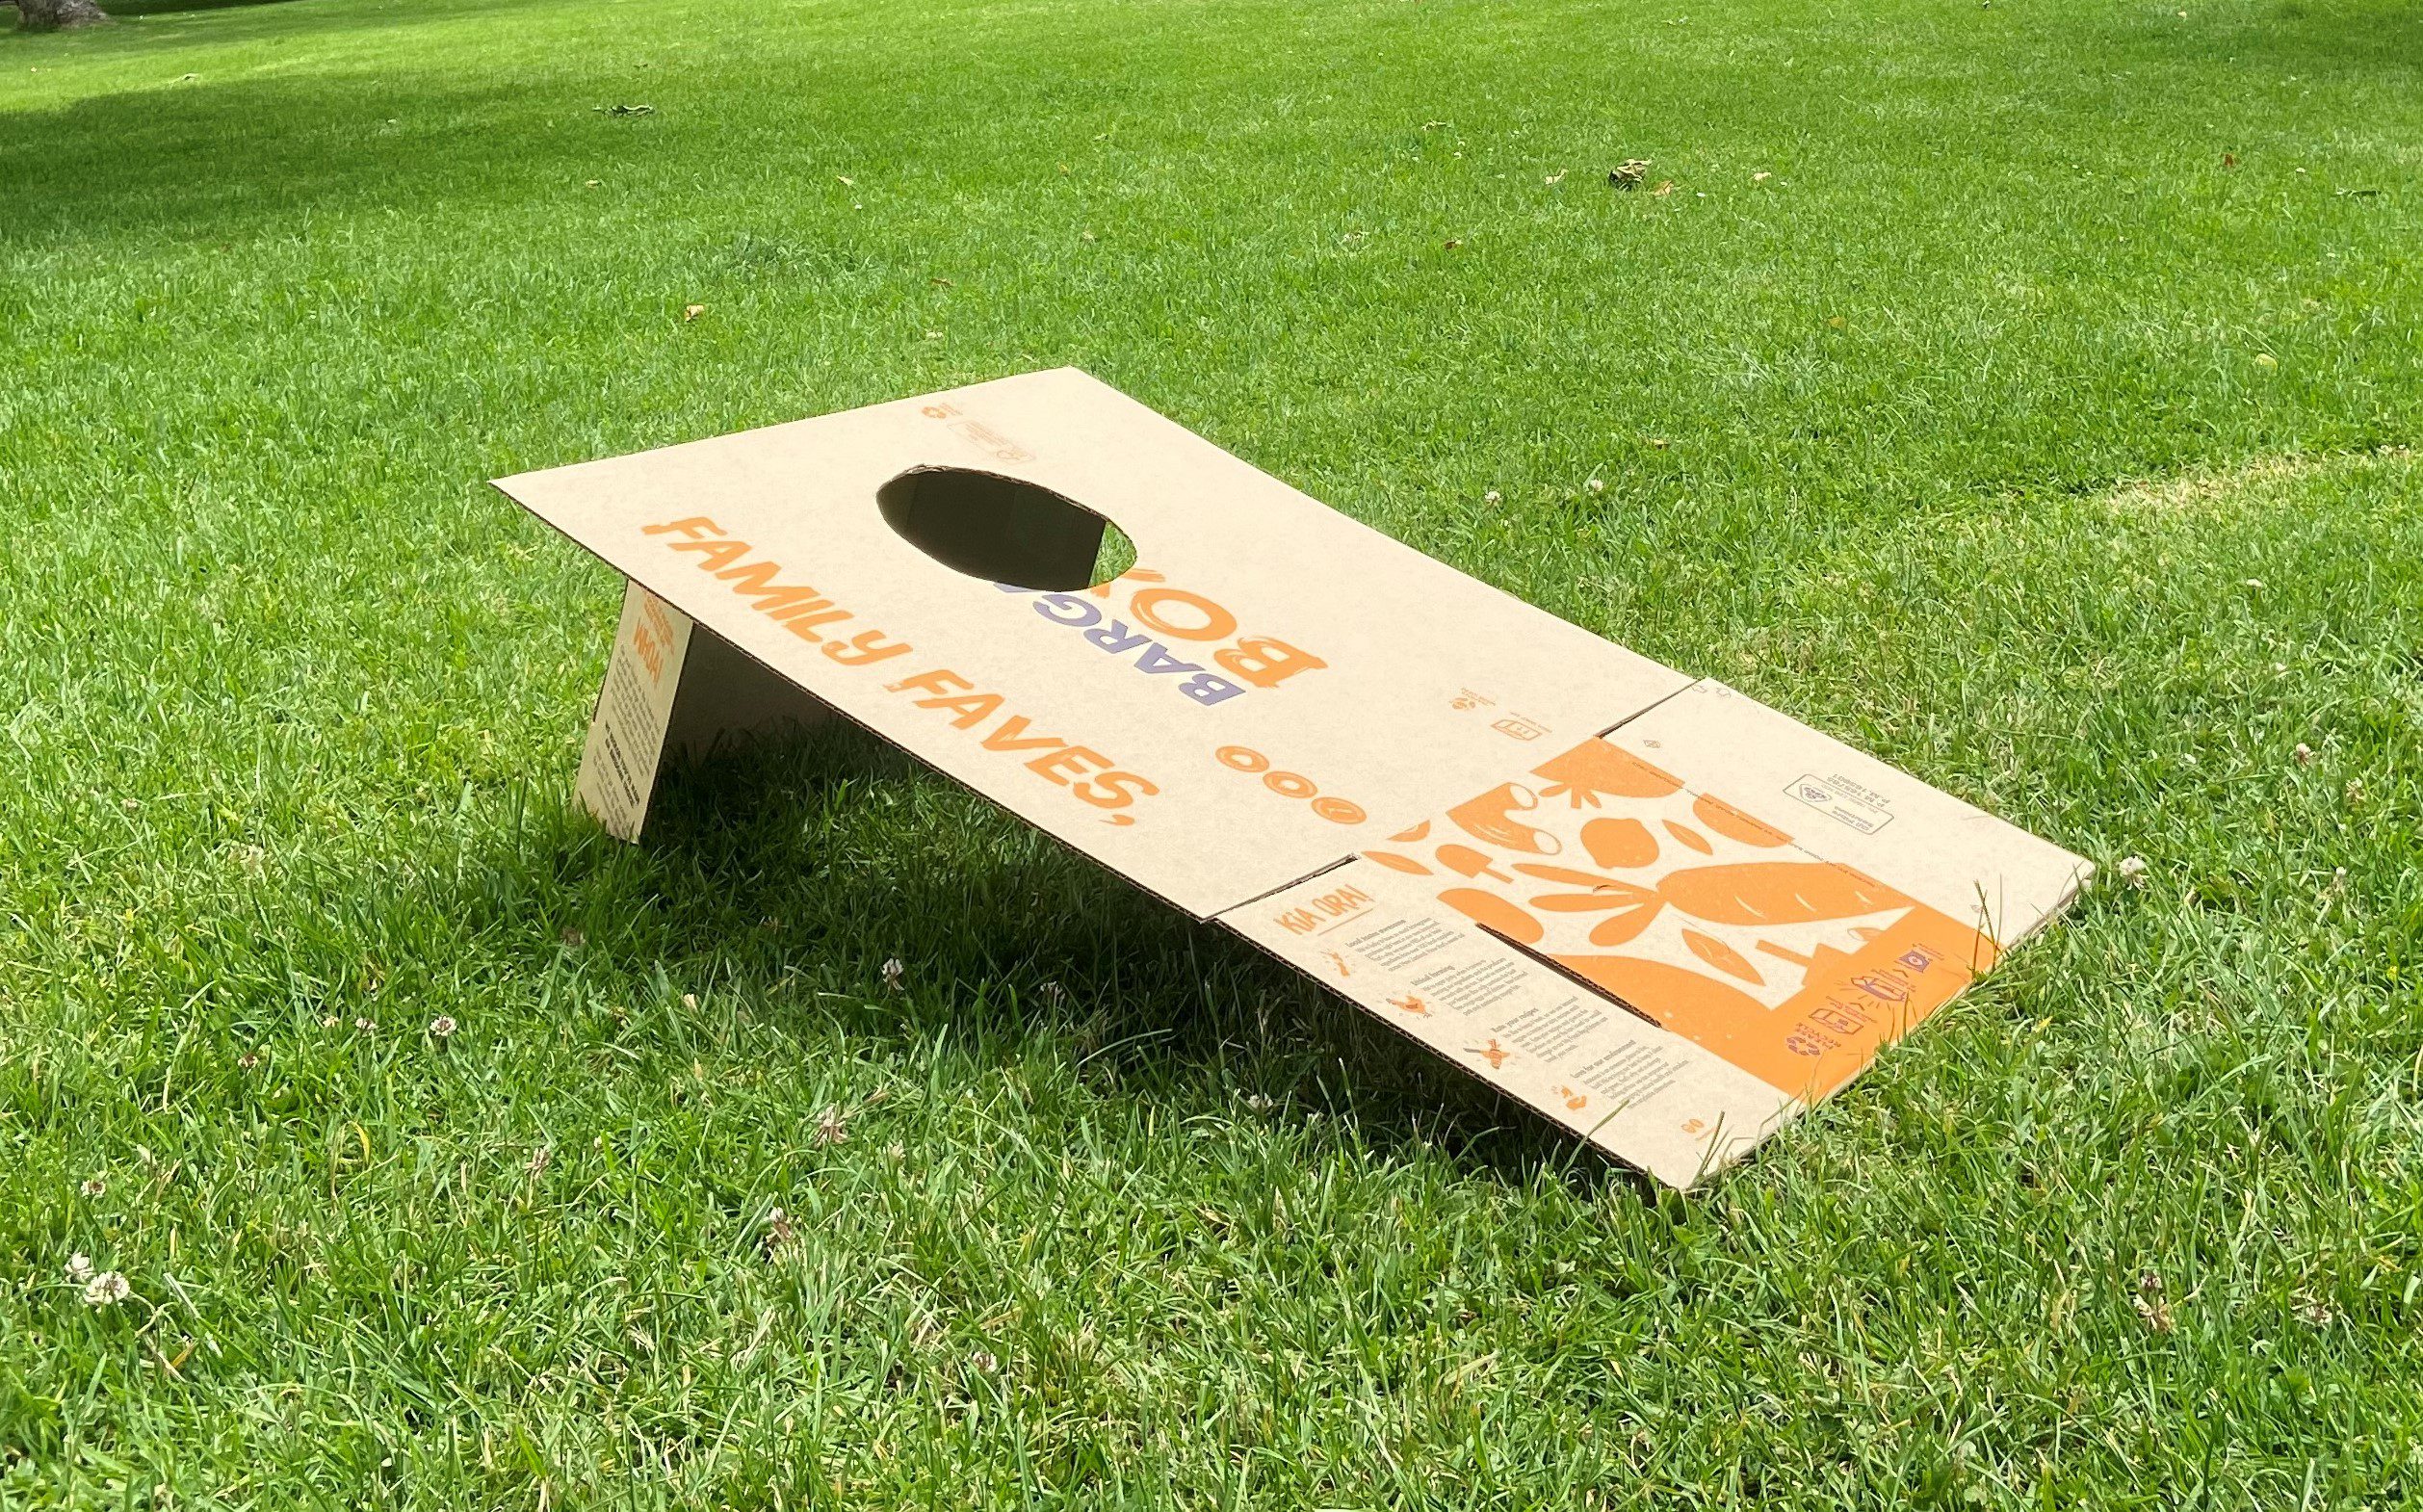 A cornhole target made from a Bargain Box.